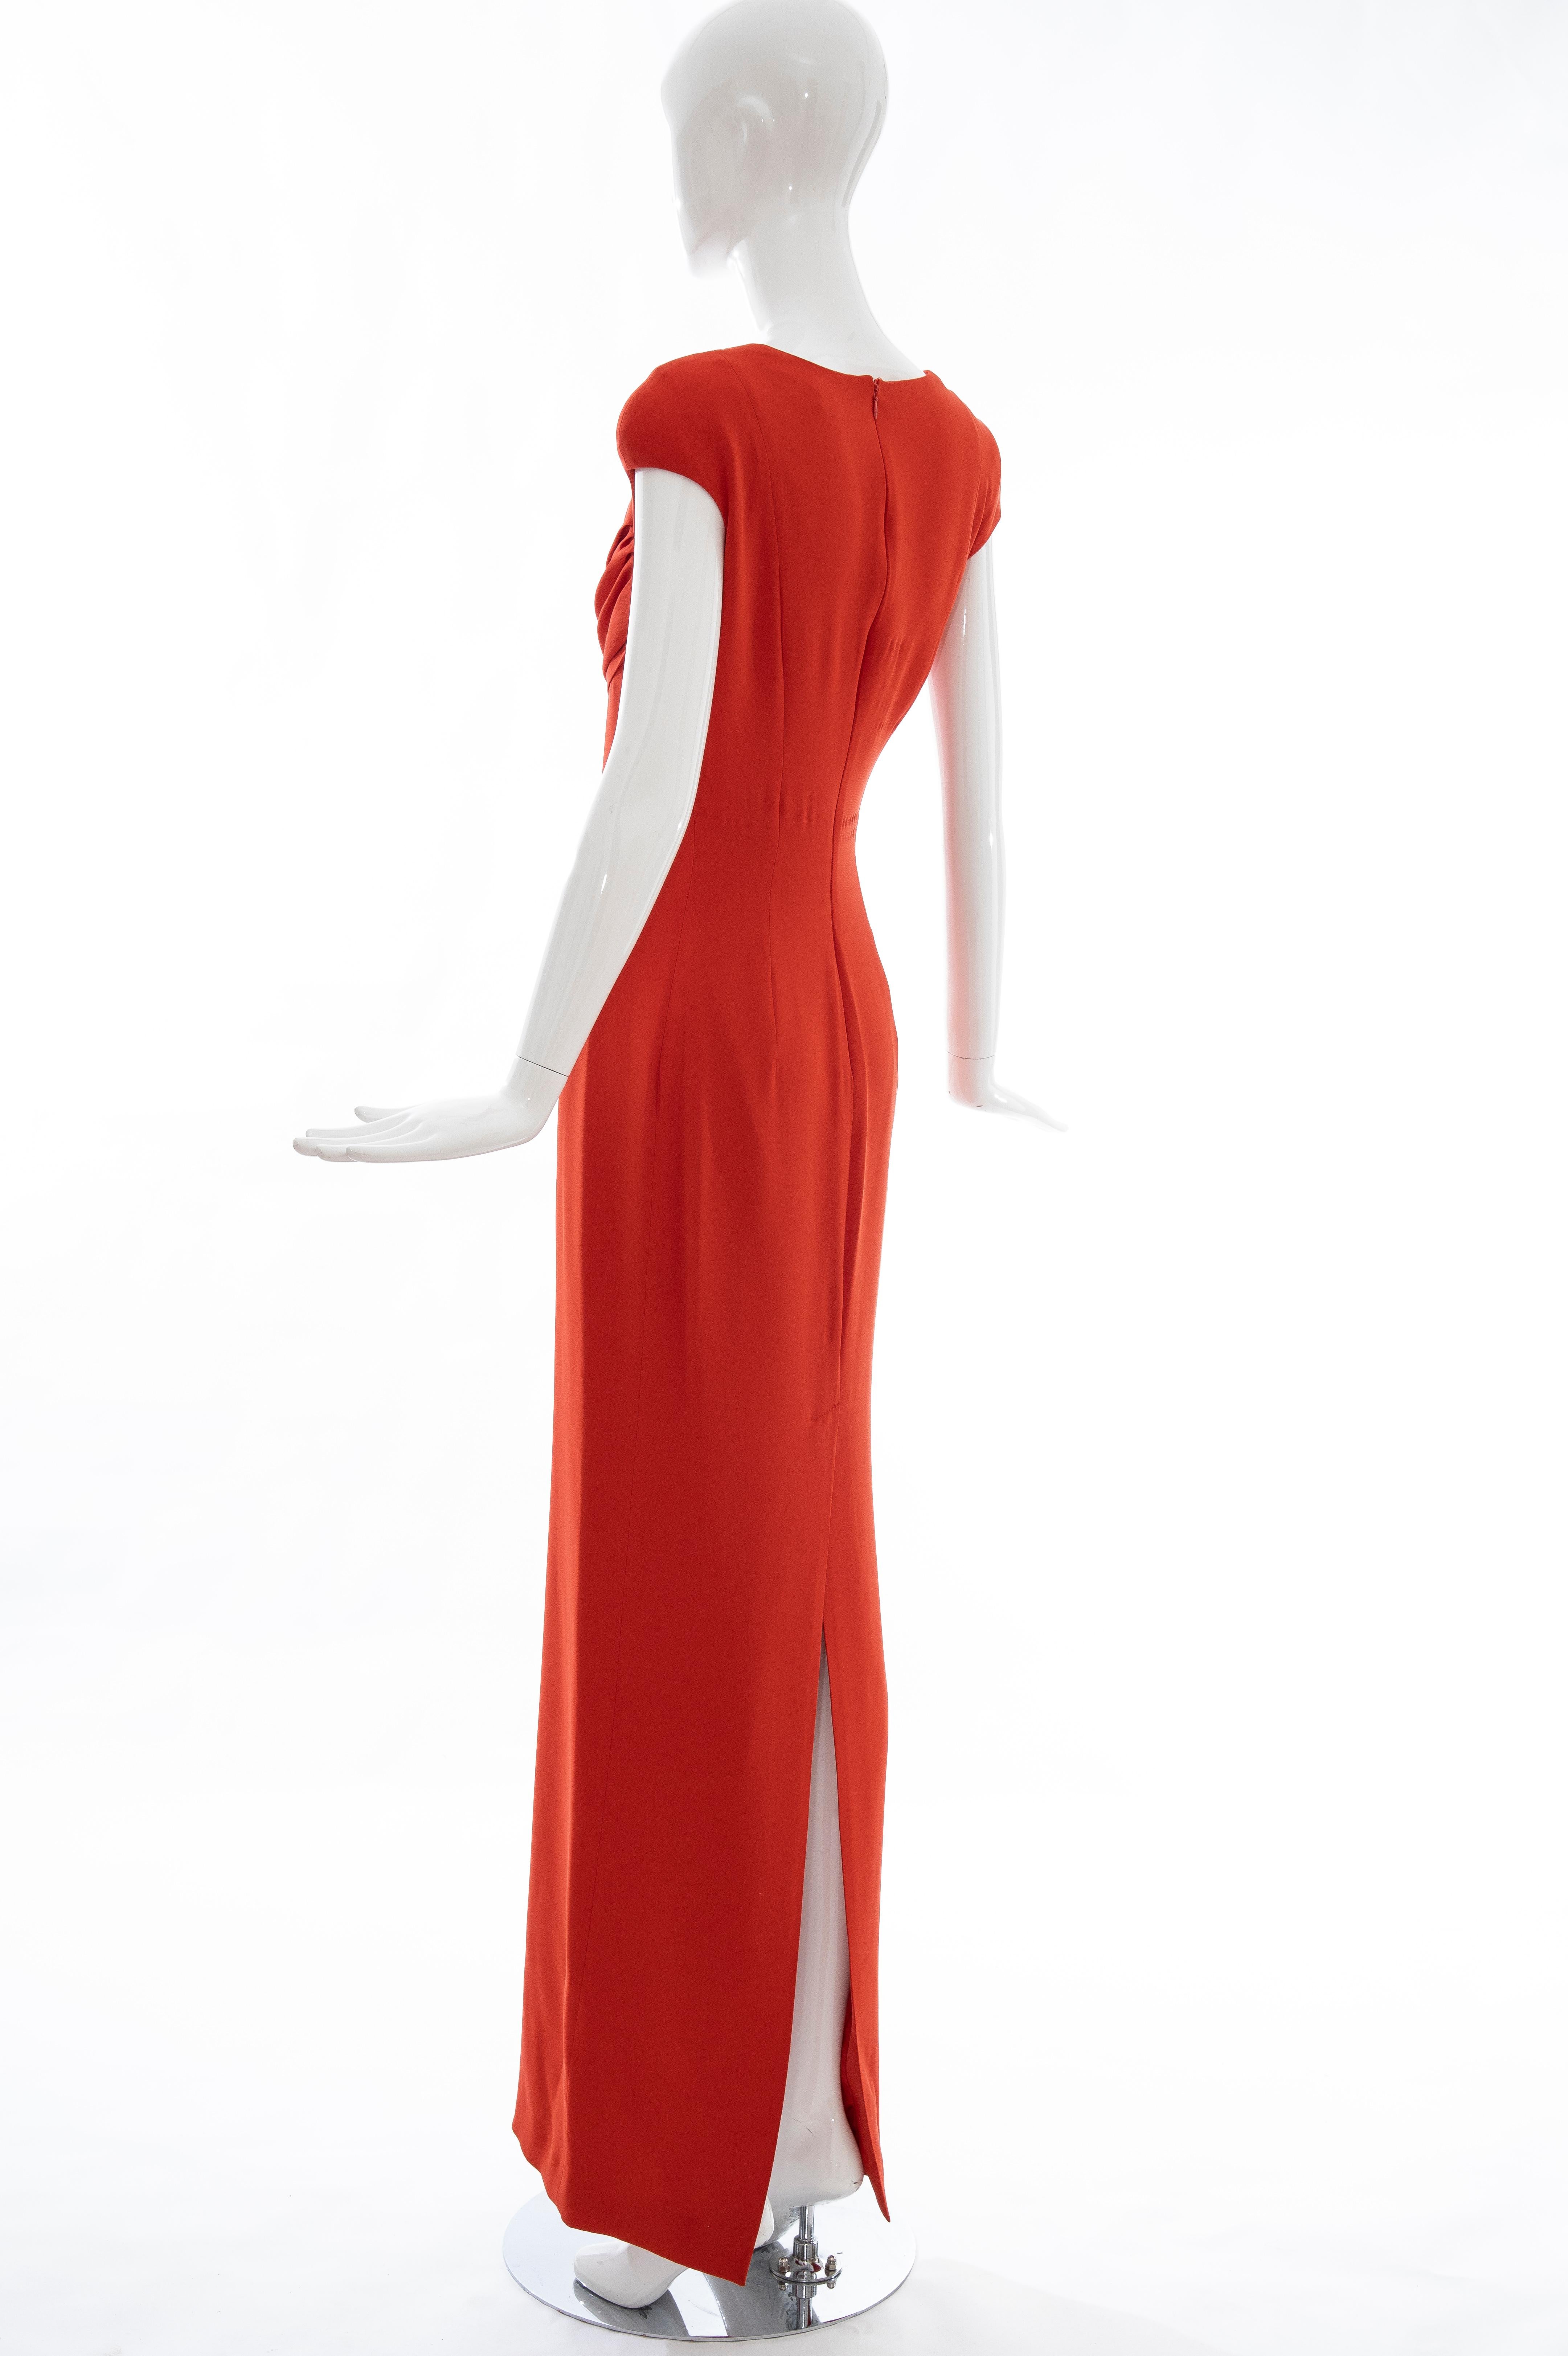 Tom Ford Runway Silk Persimmon Evening Dress With Cape, Fall 2012 11